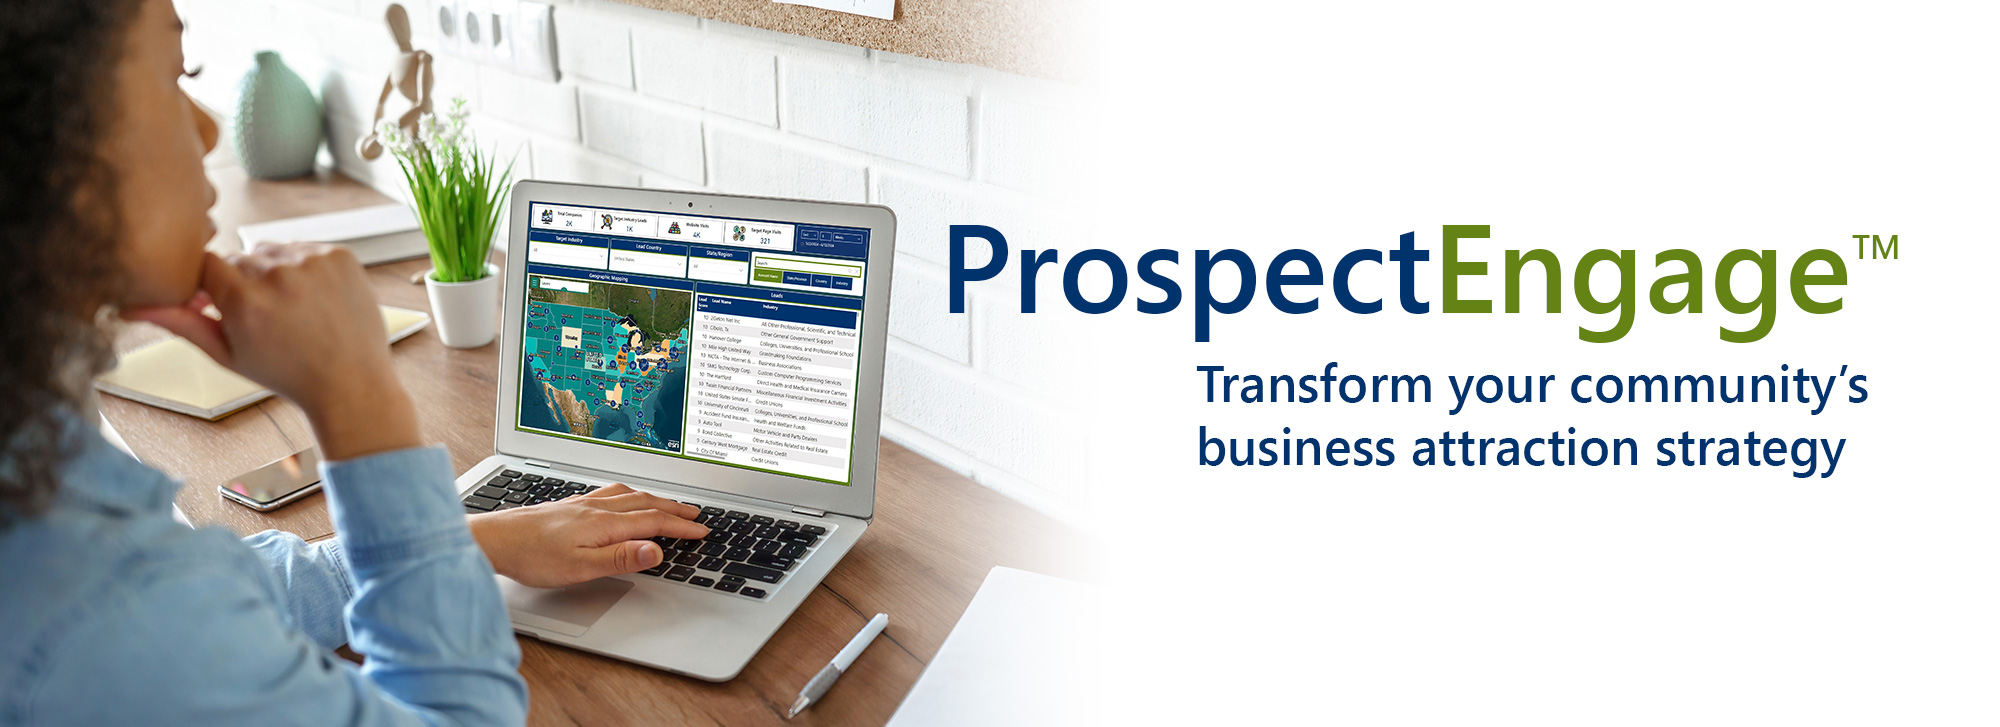 Transform your community's business attraction strategy with ProspectEngage